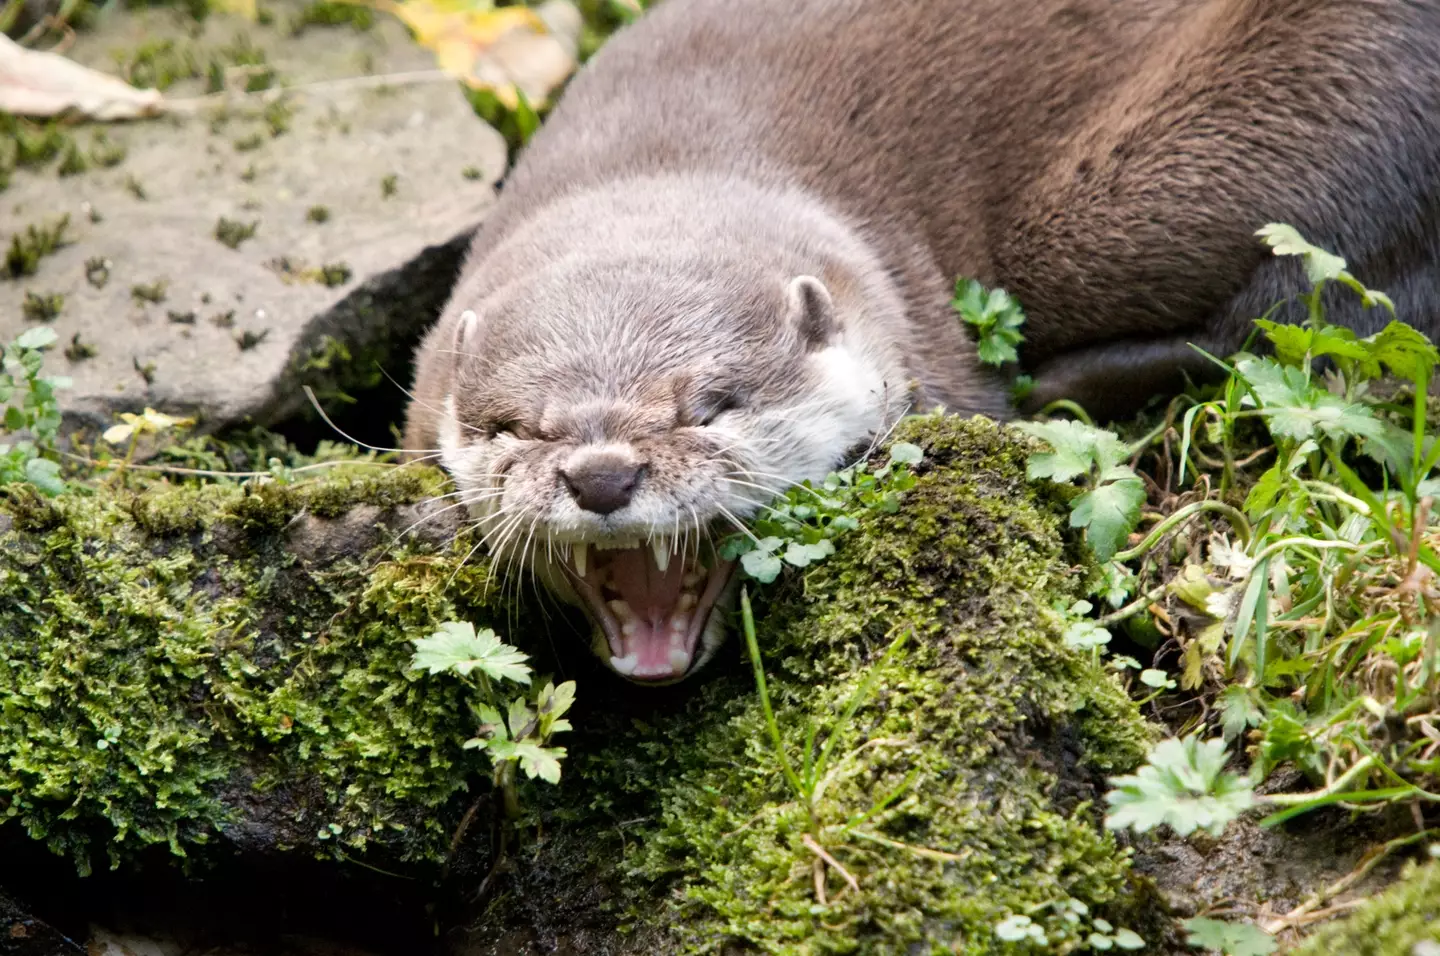 The otters turned nasty quickly.